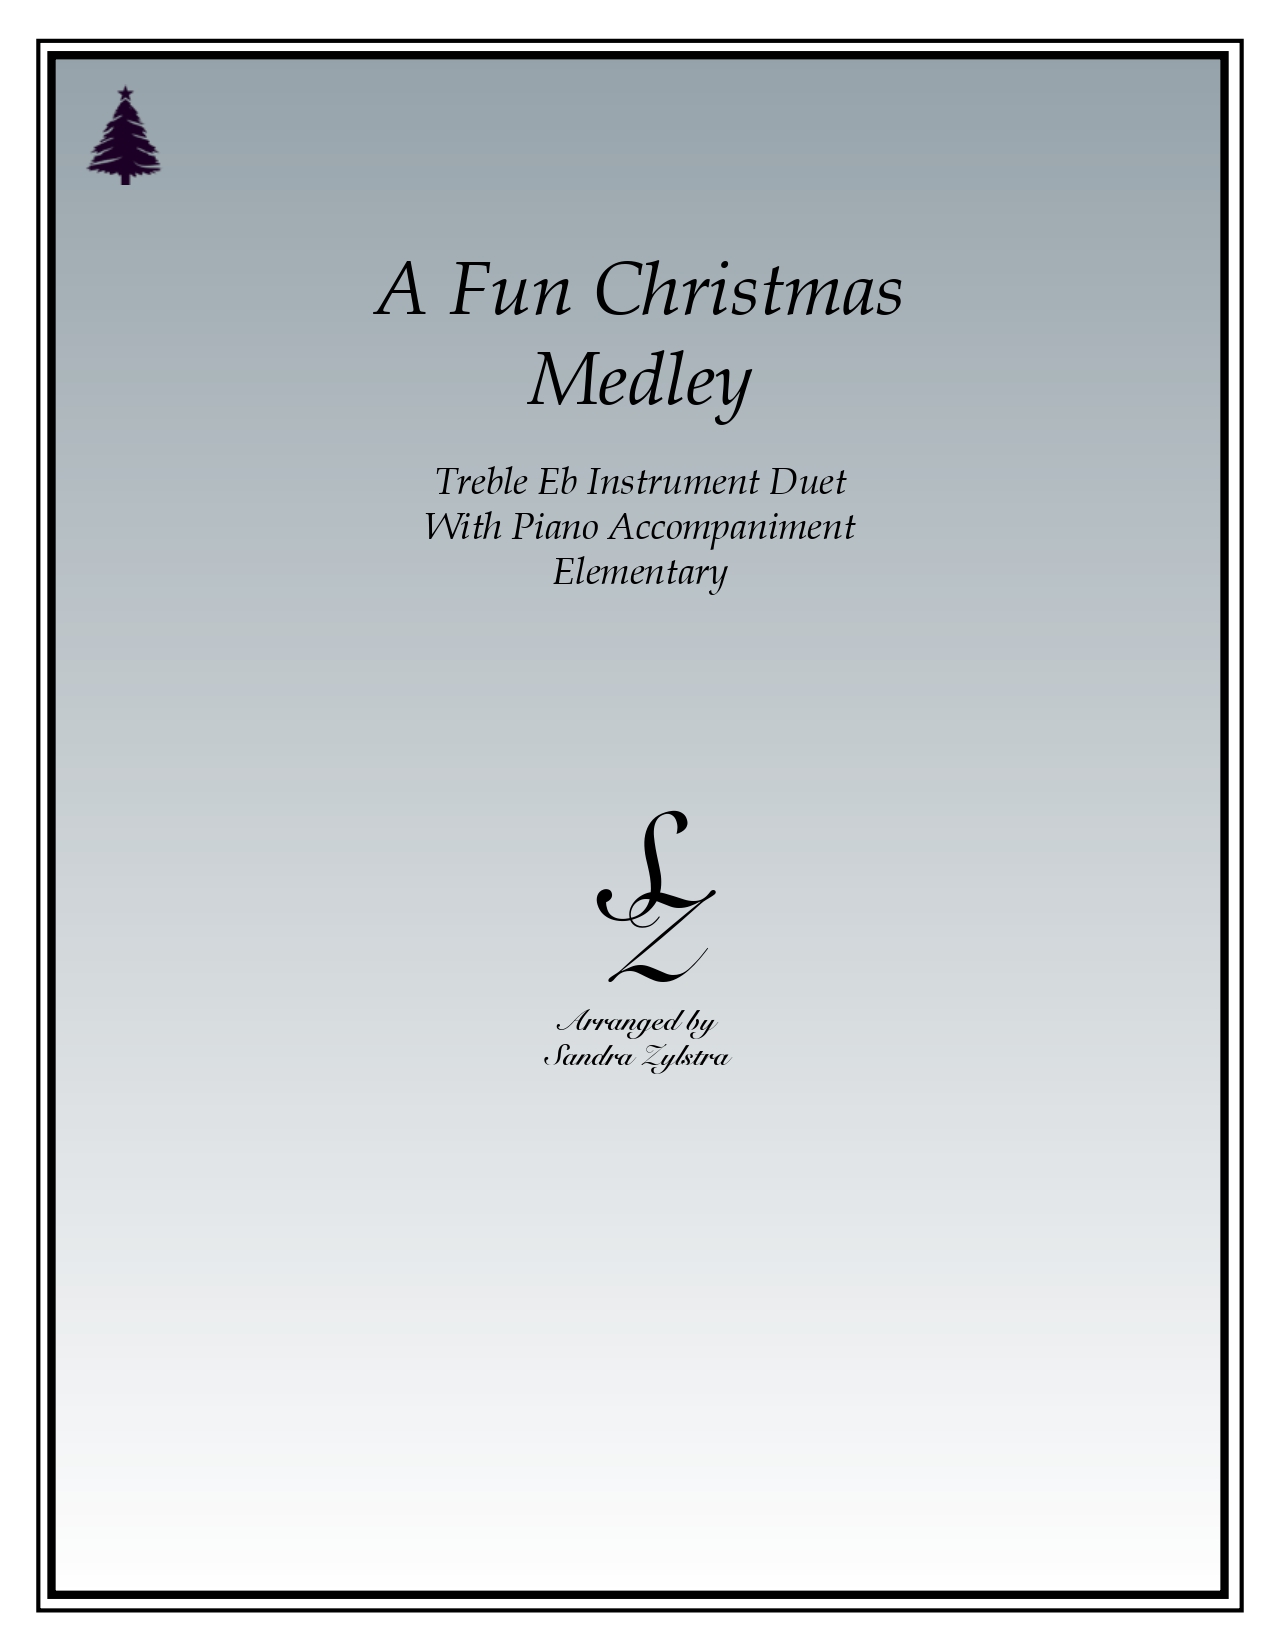 A Fun Christmas Medley Eb instrument duet parts cover page 00011